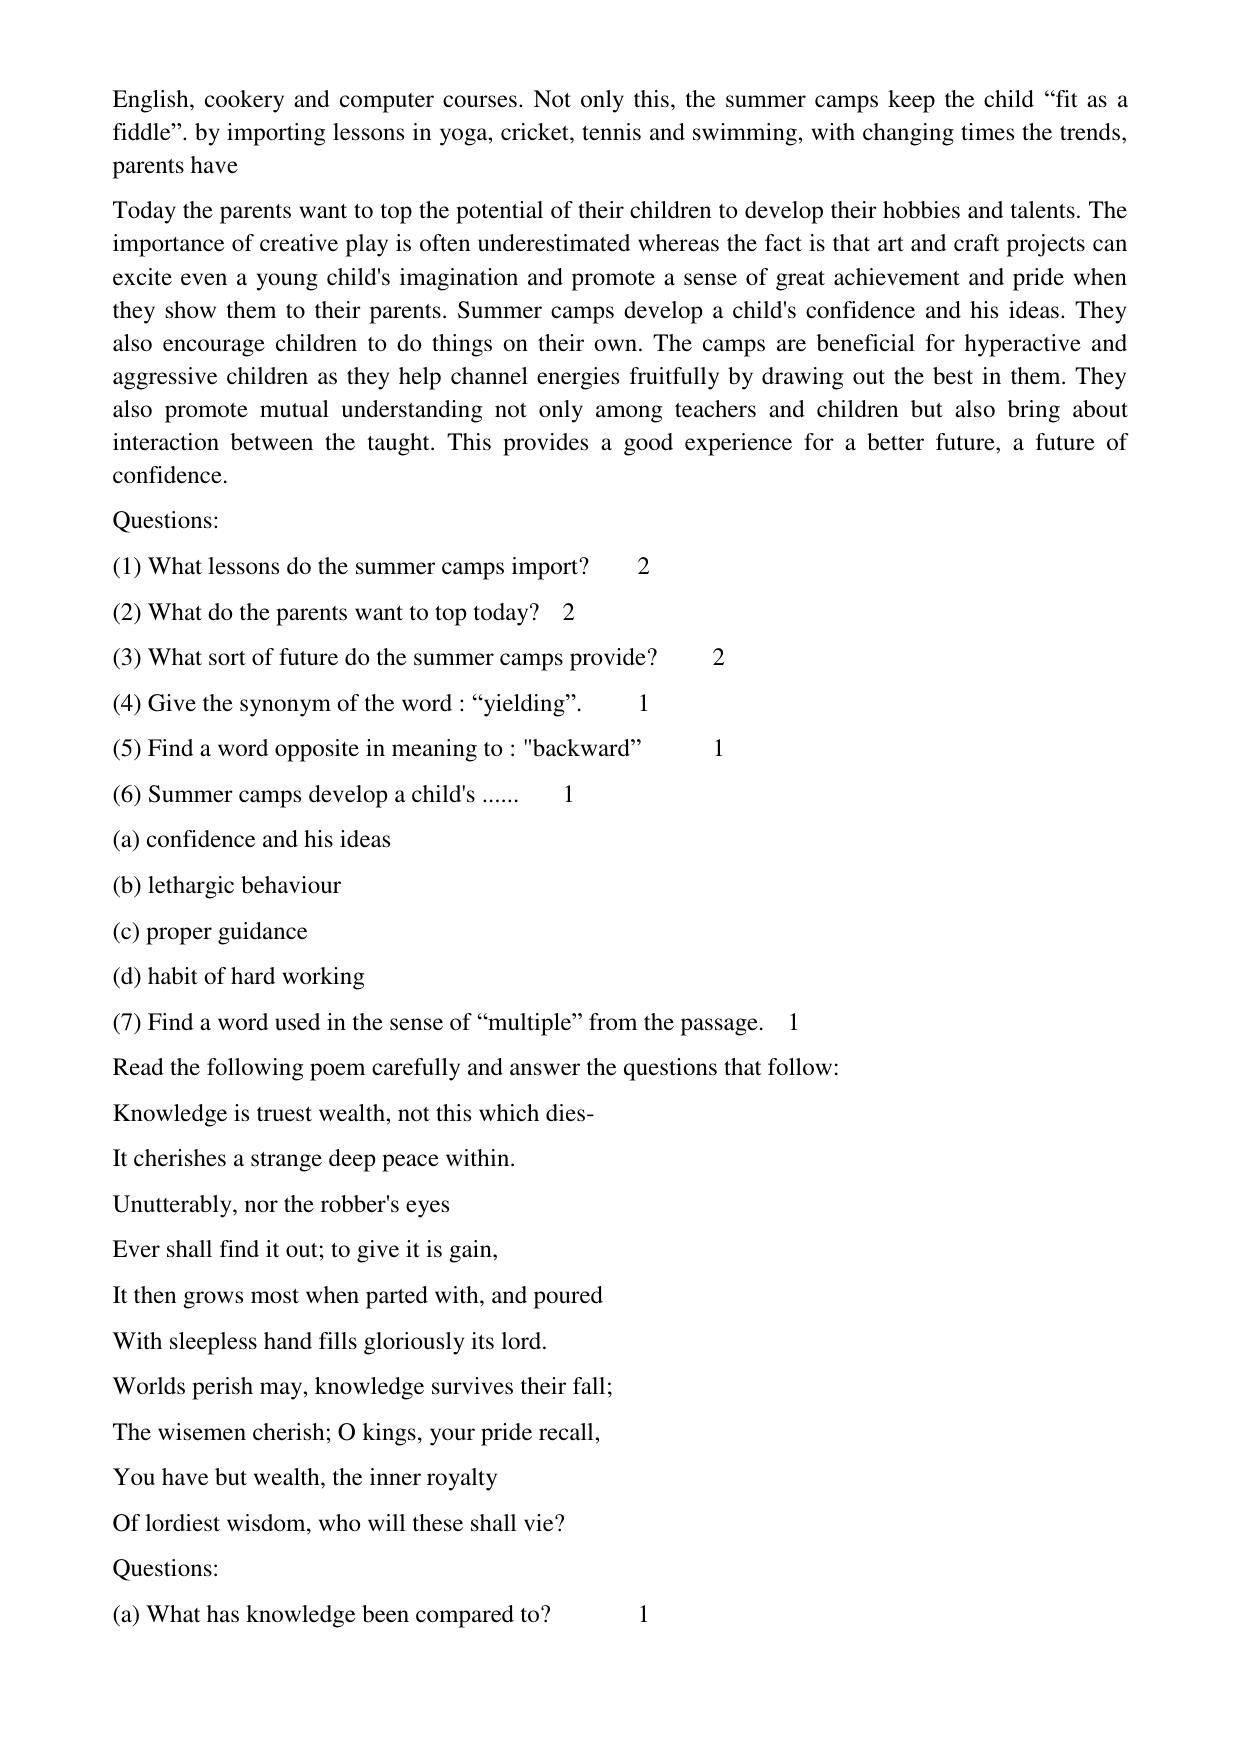 MP Board Class 12 English Special 2018 Question Paper - Page 4